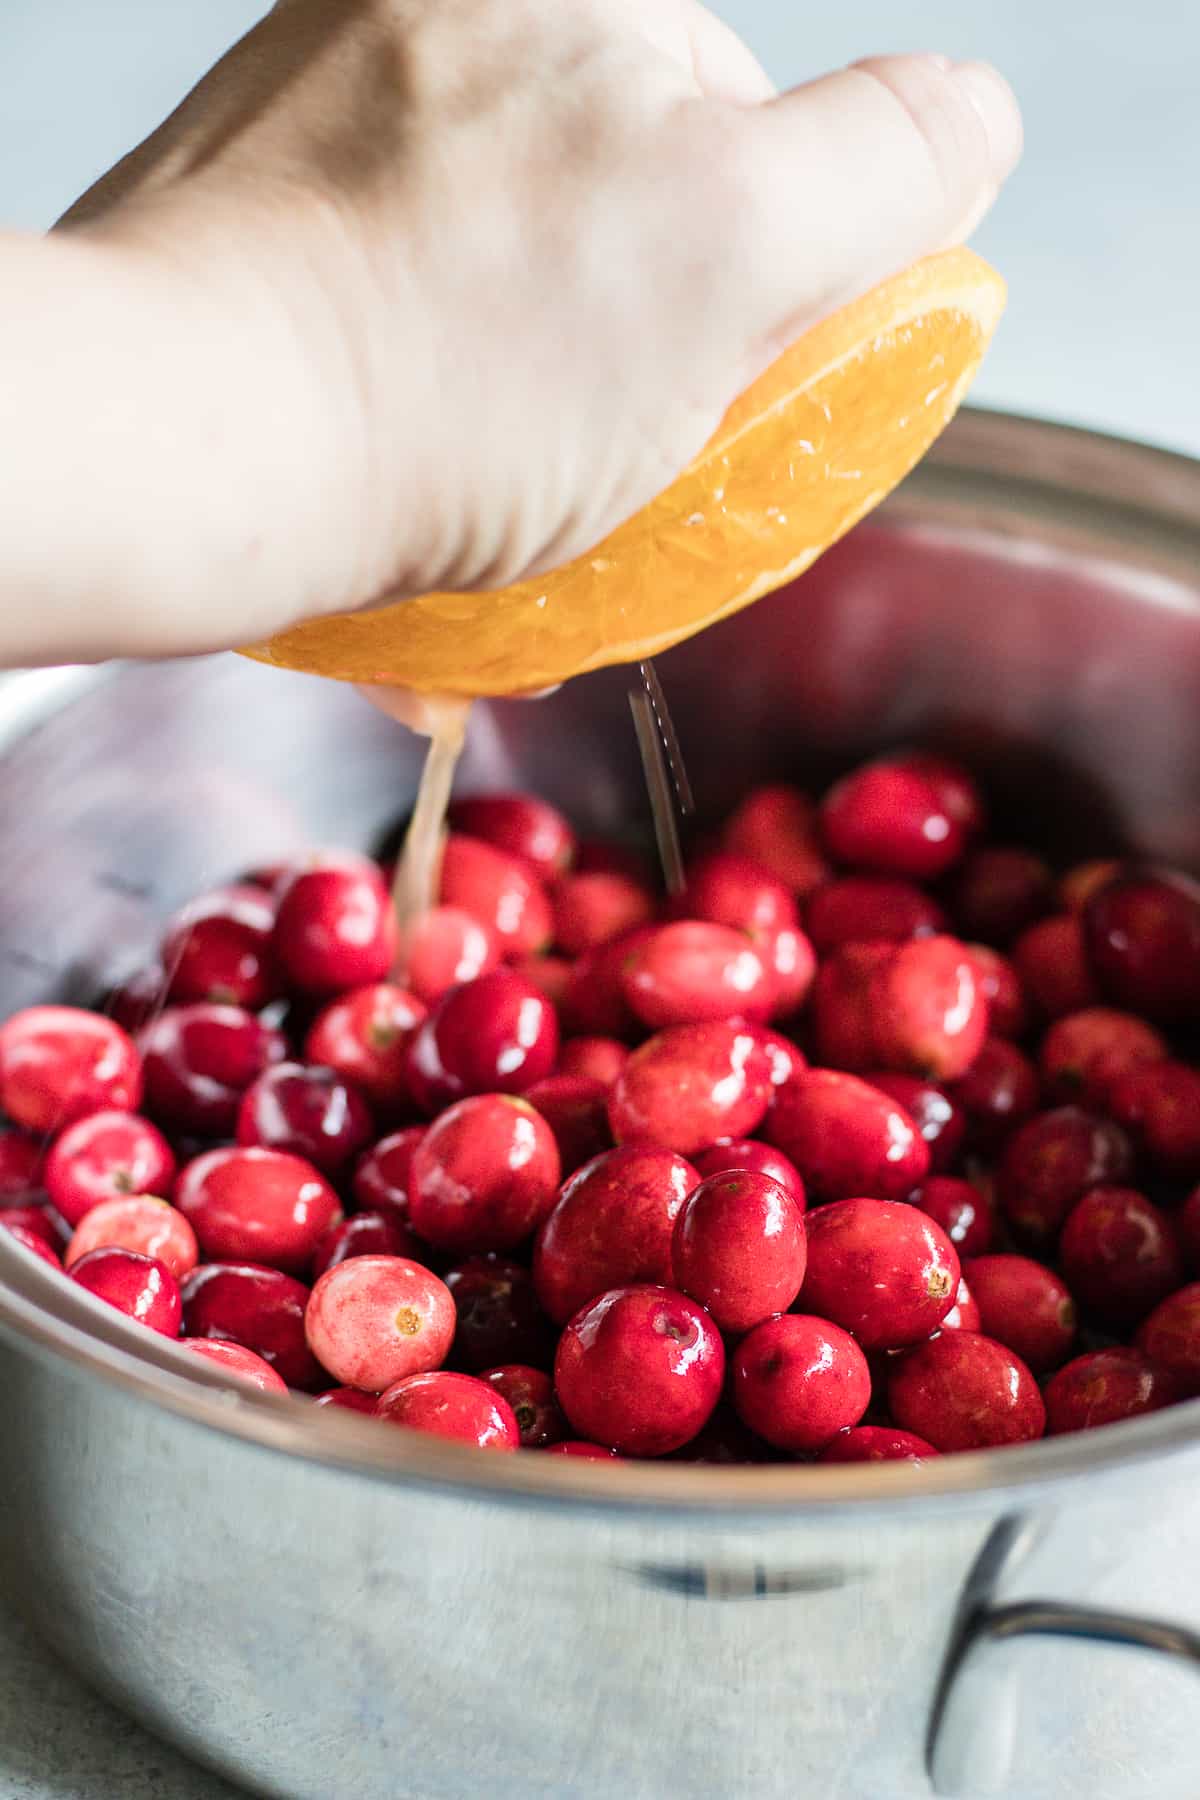 Sweet and tart homemade cranberry sauce made with orange juice and apple cider!